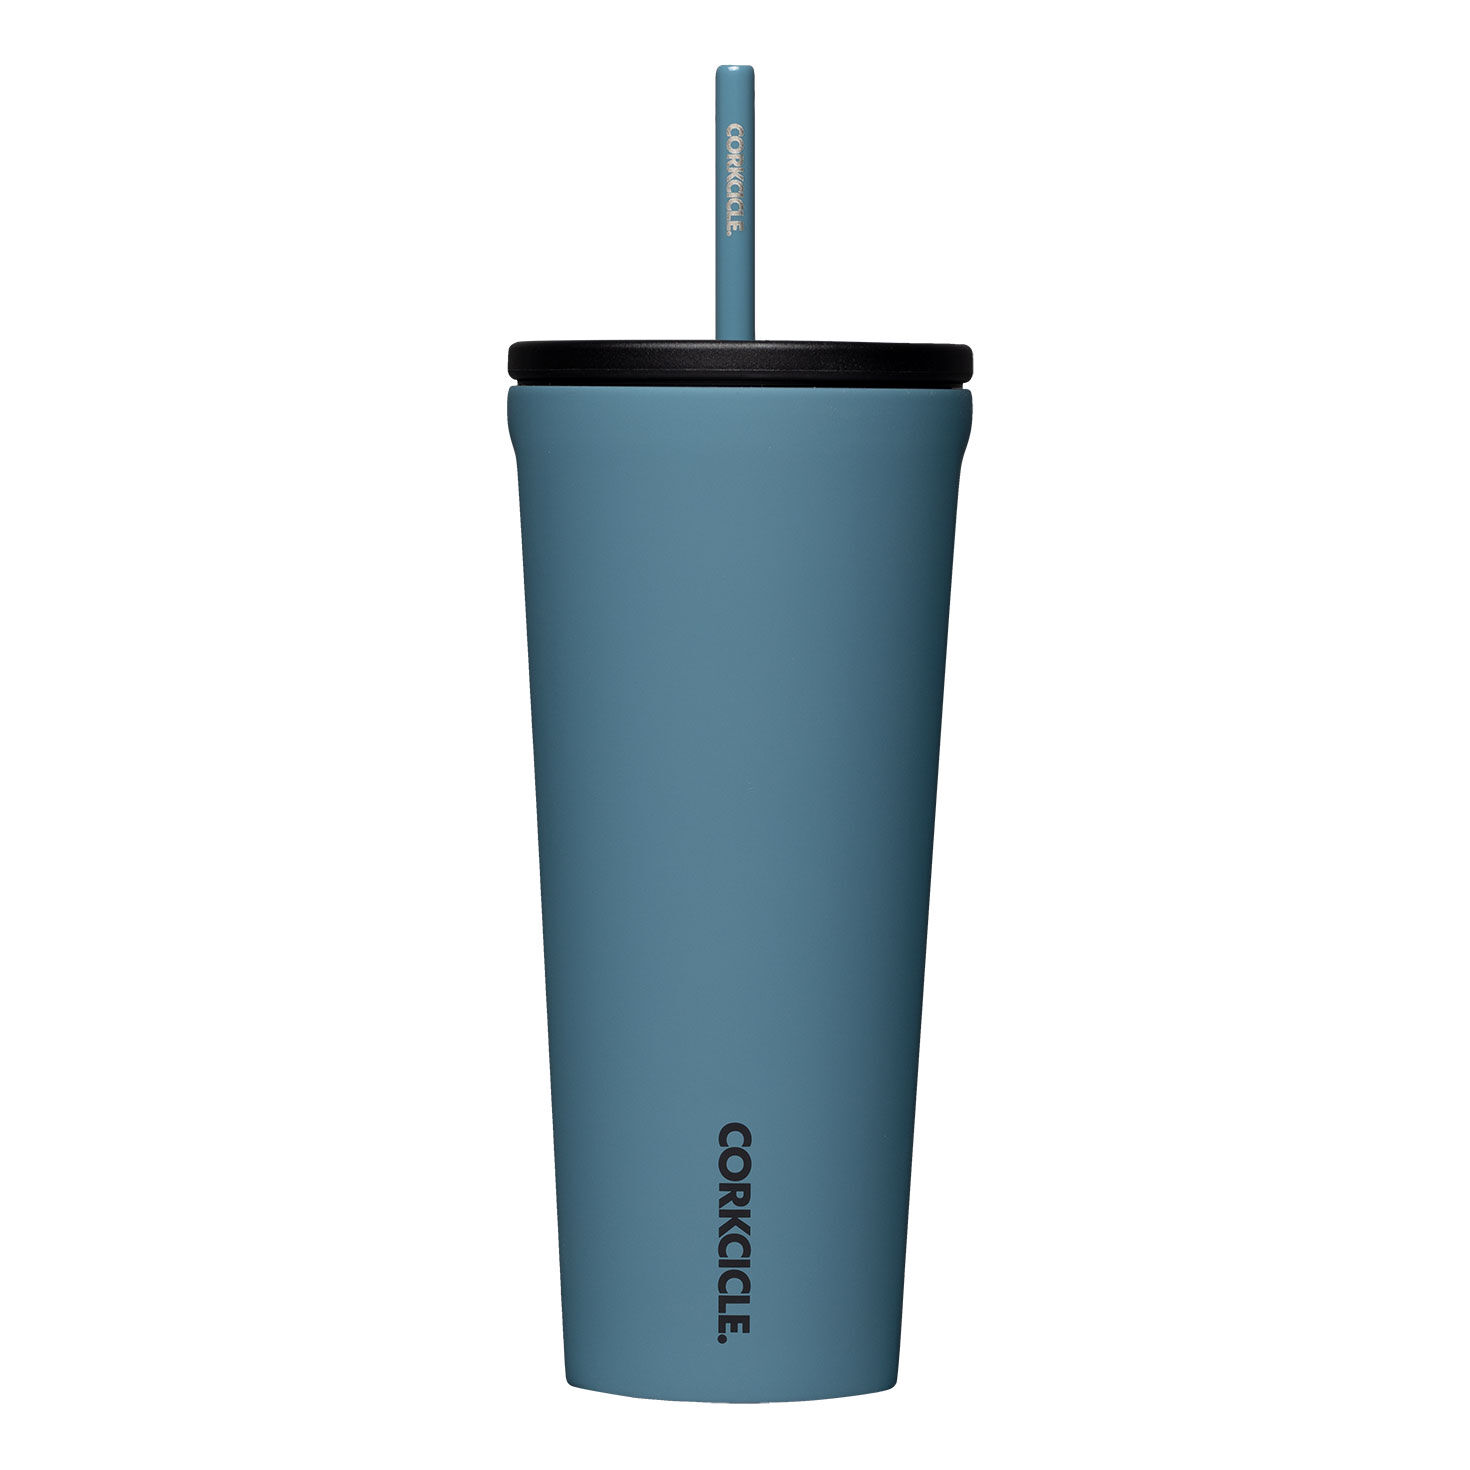 https://www.hallmark.com/dw/image/v2/AALB_PRD/on/demandware.static/-/Sites-hallmark-master/default/dwec6c7994/images/finished-goods/products/2224CST/Corkcicle-Large-Solid-Blue-Metal-Cup-With-Straw_2224CST_01.jpg?sfrm=jpg